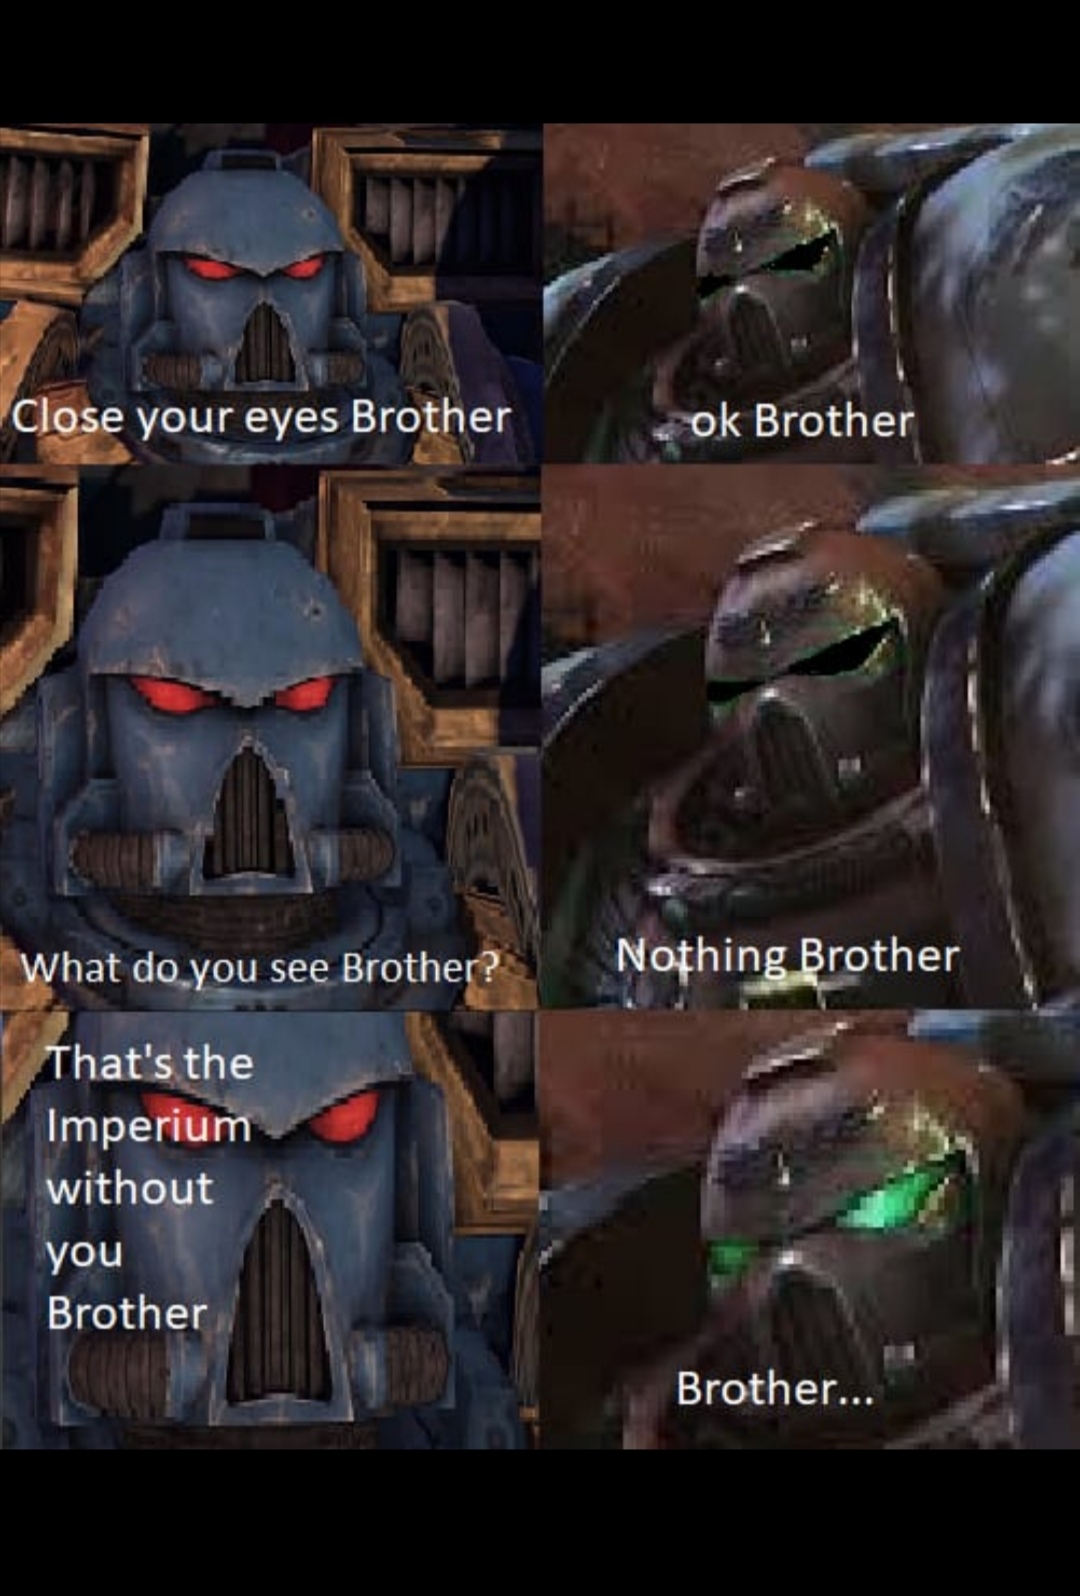 warhammer brother meme - Close your eyes Brother ok Brother What do you see Brother? Nothing Brother That's the Imperium without you Brother Brother...